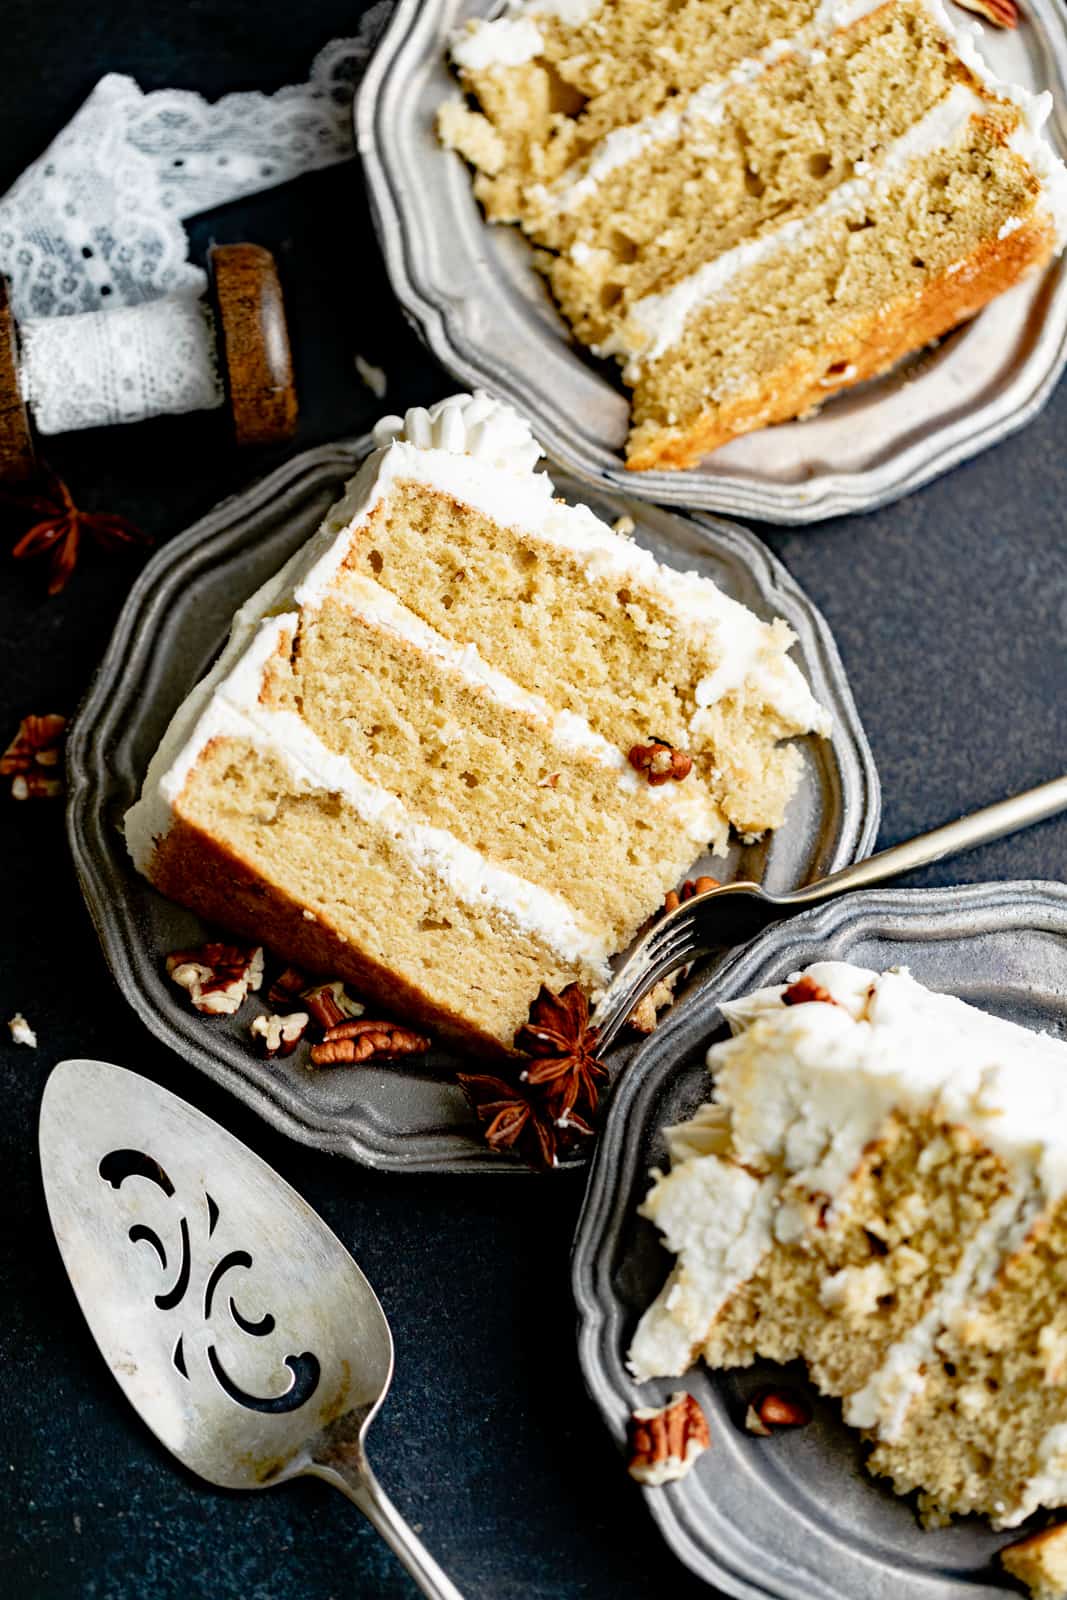 slices of cardamom cake on a plate with chopped pecans.